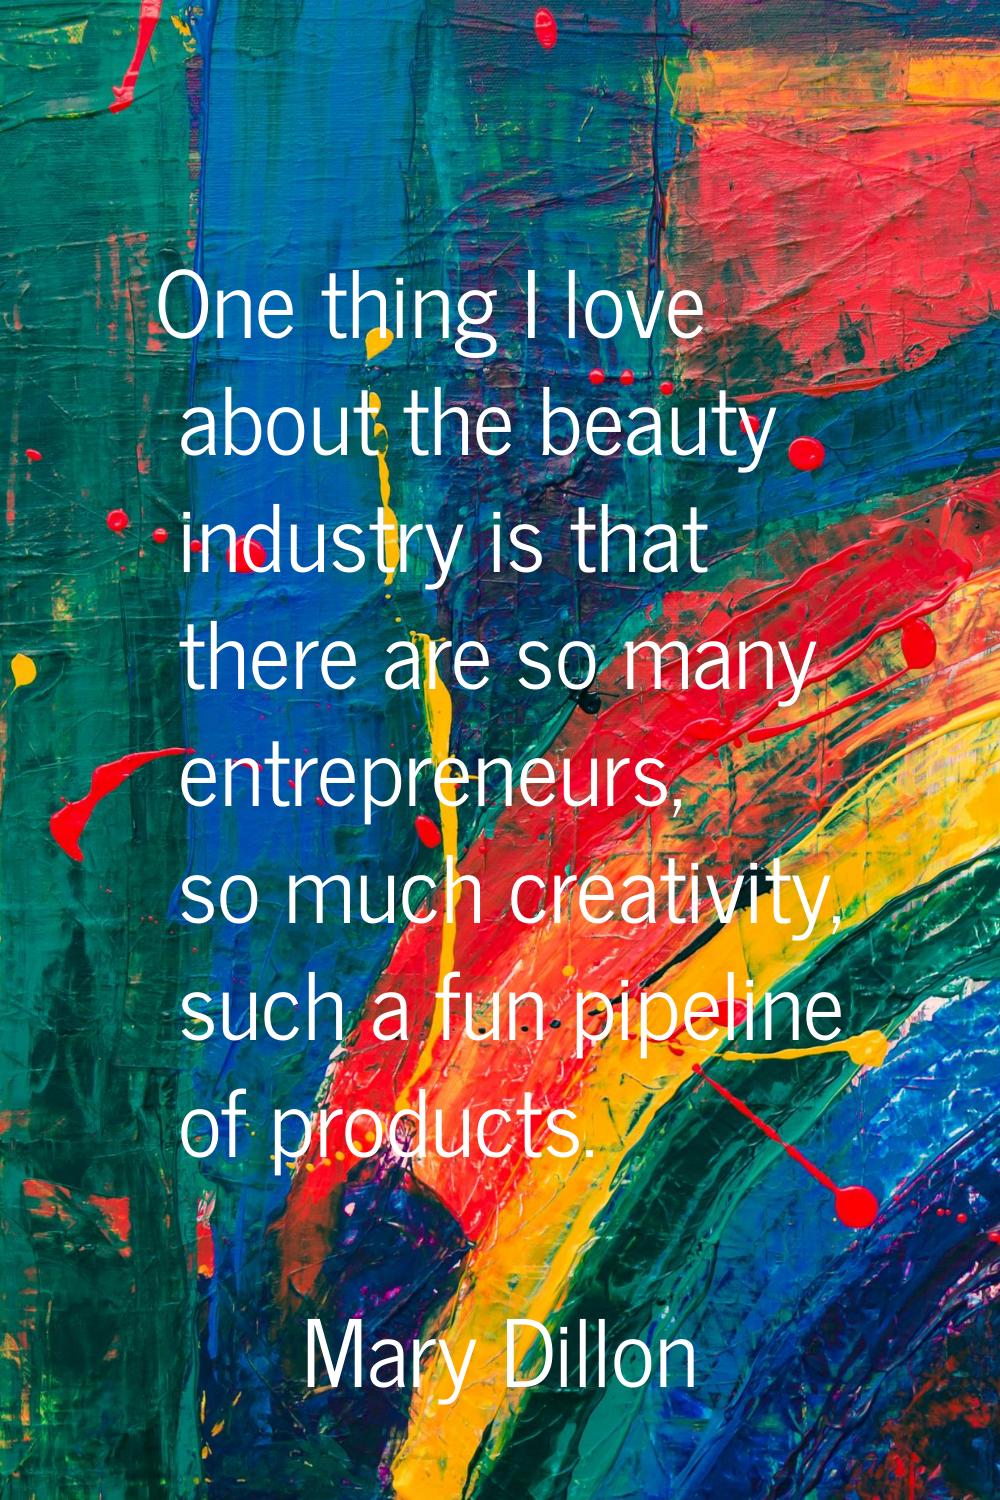 One thing I love about the beauty industry is that there are so many entrepreneurs, so much creativ